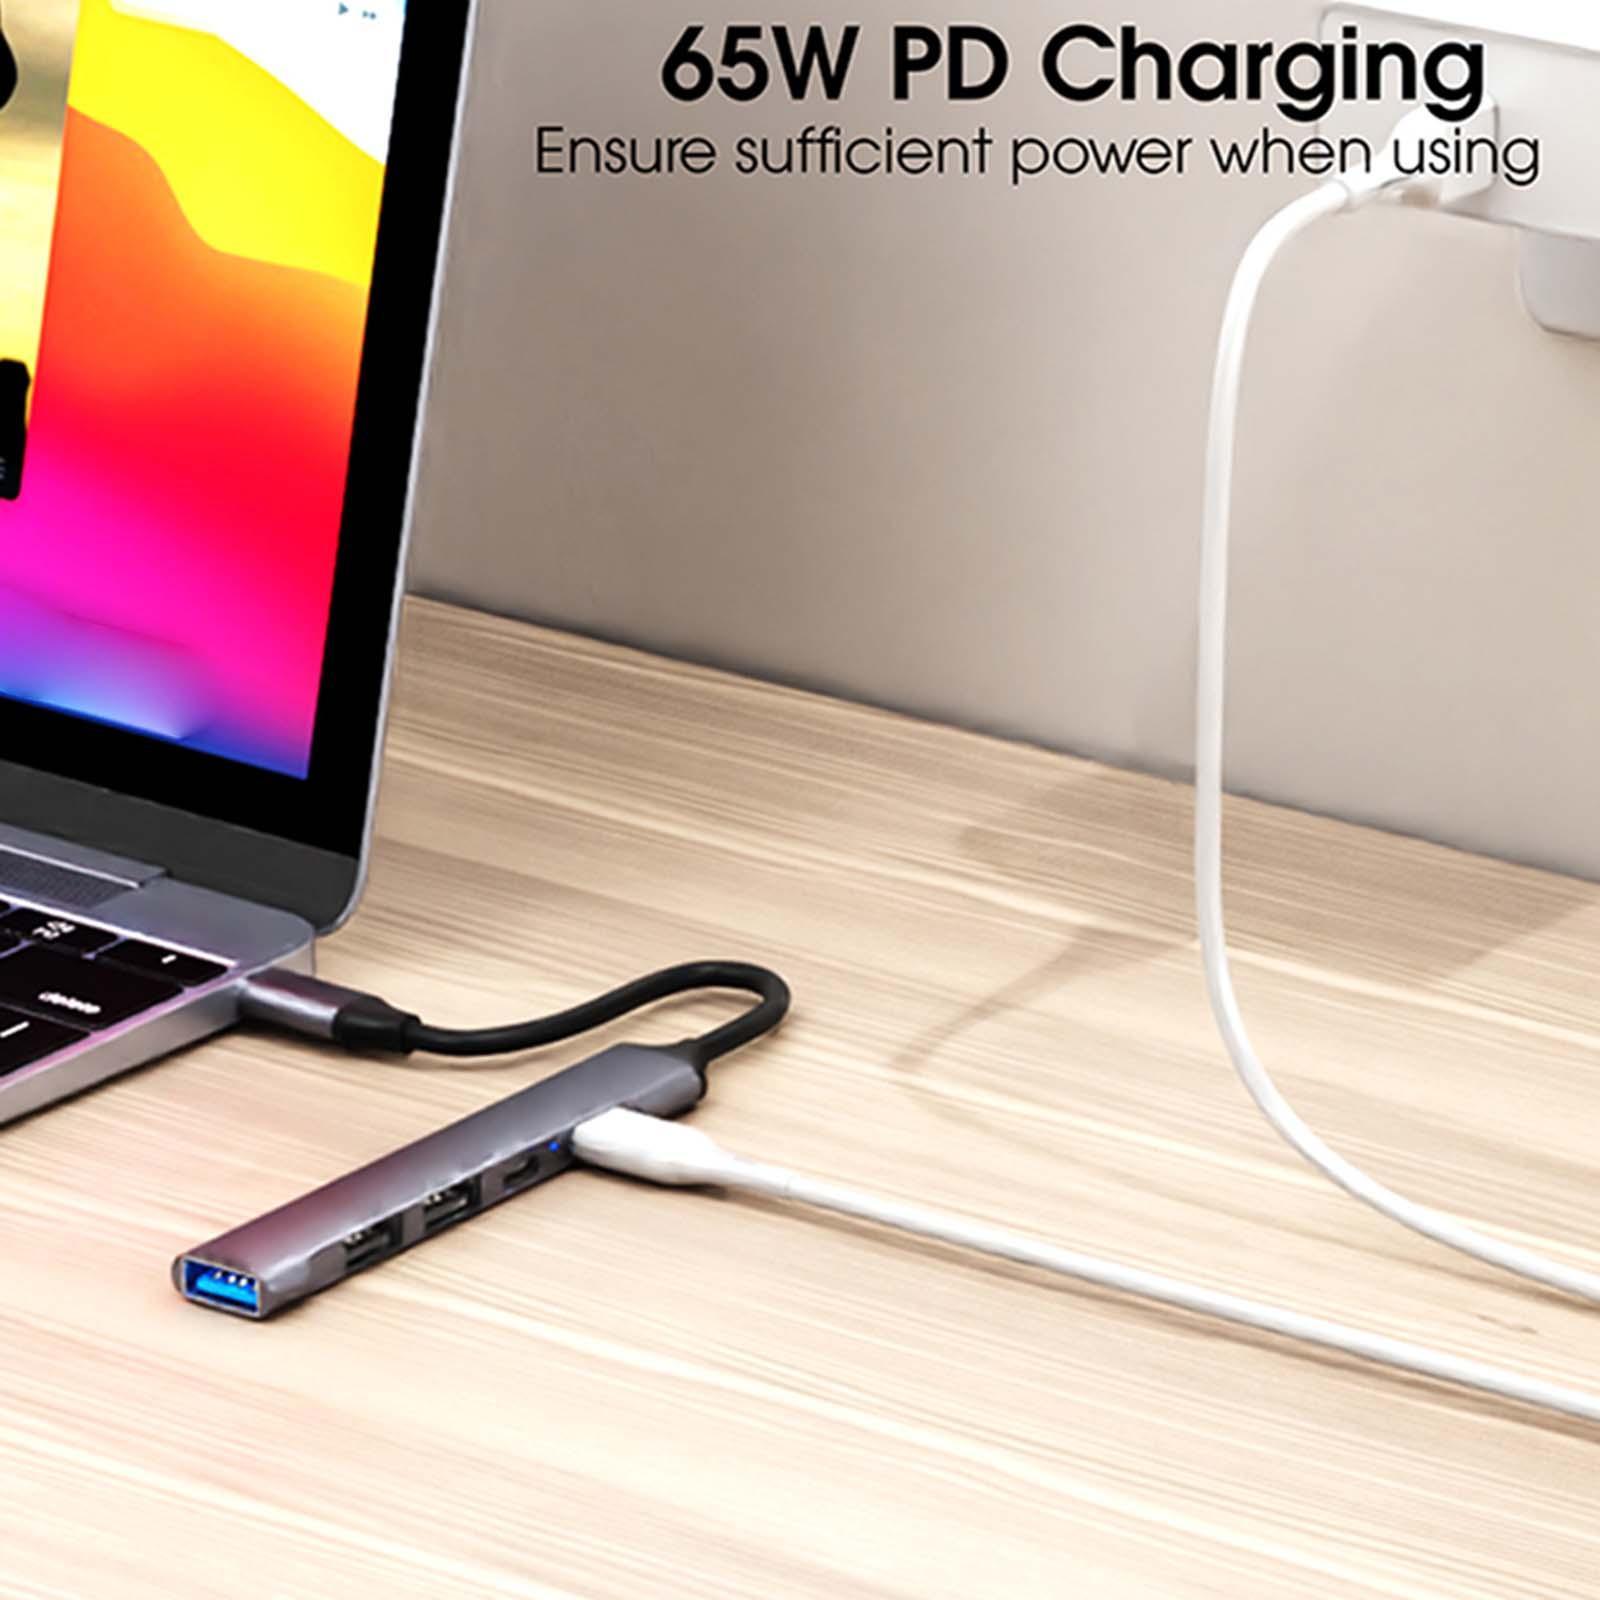 5 in 1 USB Type Hub, 1 USB 3.0 5Gbps Data Transfer PD Fast Charging 2 USB2.0 Ports Compact Splitter Docking Station, for Type C Devices.